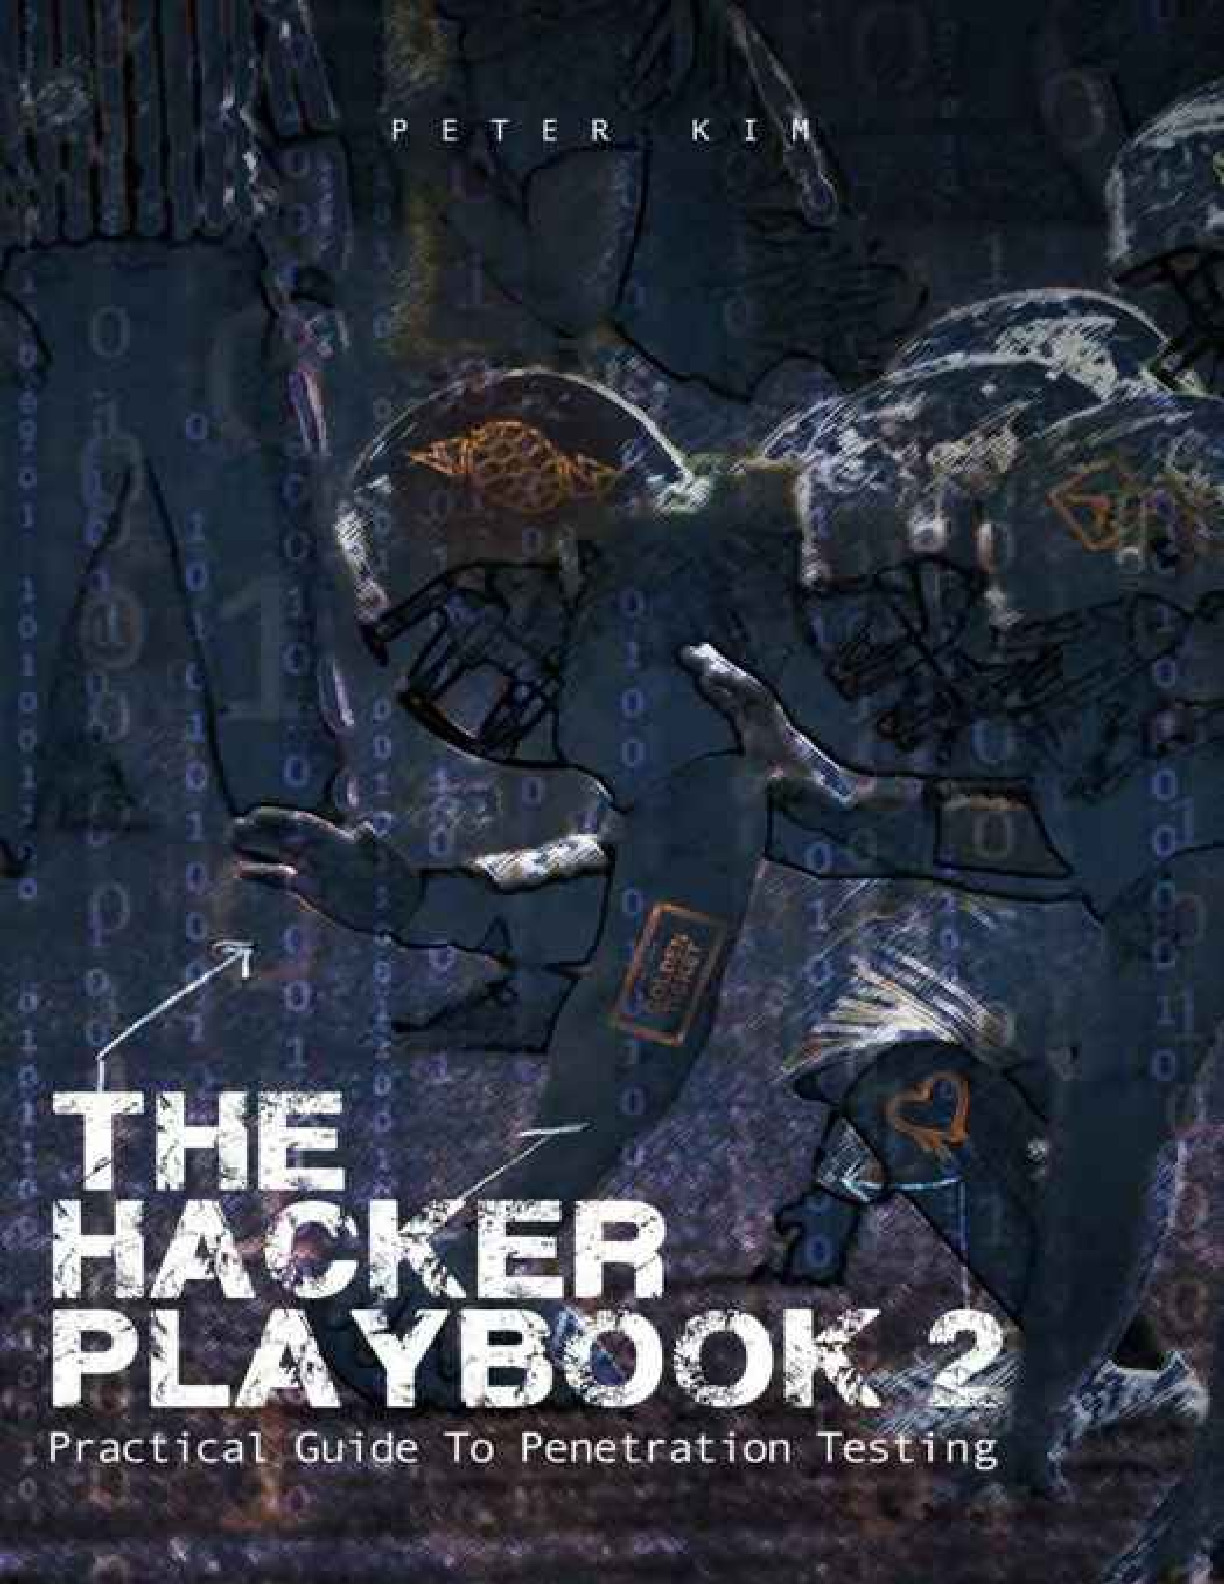 The-Hacker-Playbook-2-Practical-Guide-To-Penetration-Testing-By-Peter-Kim-Psycho.Killer